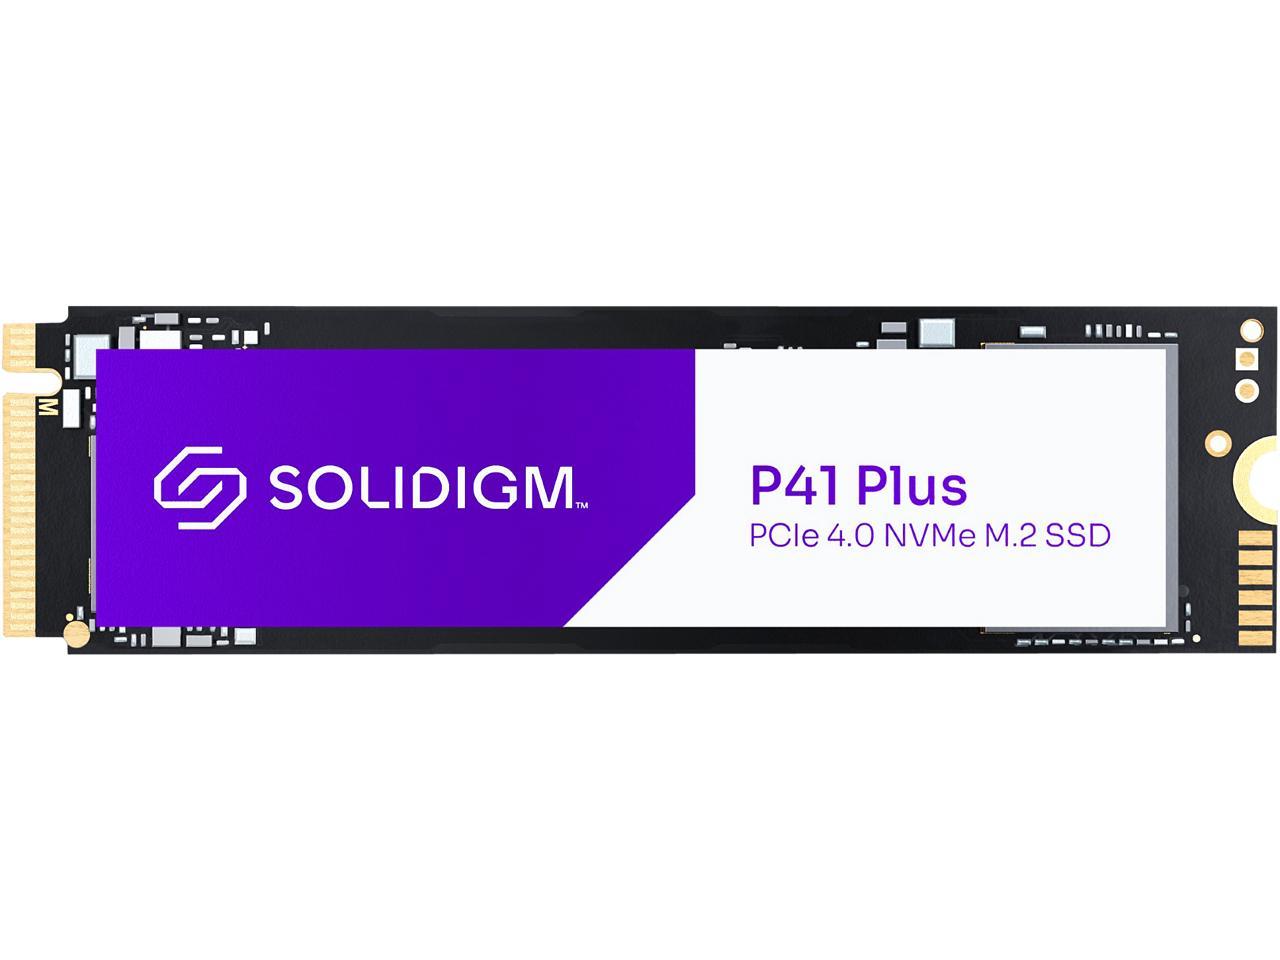 2TB Solidigm P41 Plus M.2 2280 PCIe NVMe 4.0 x4 Solid State Drive $90 + Free Shipping